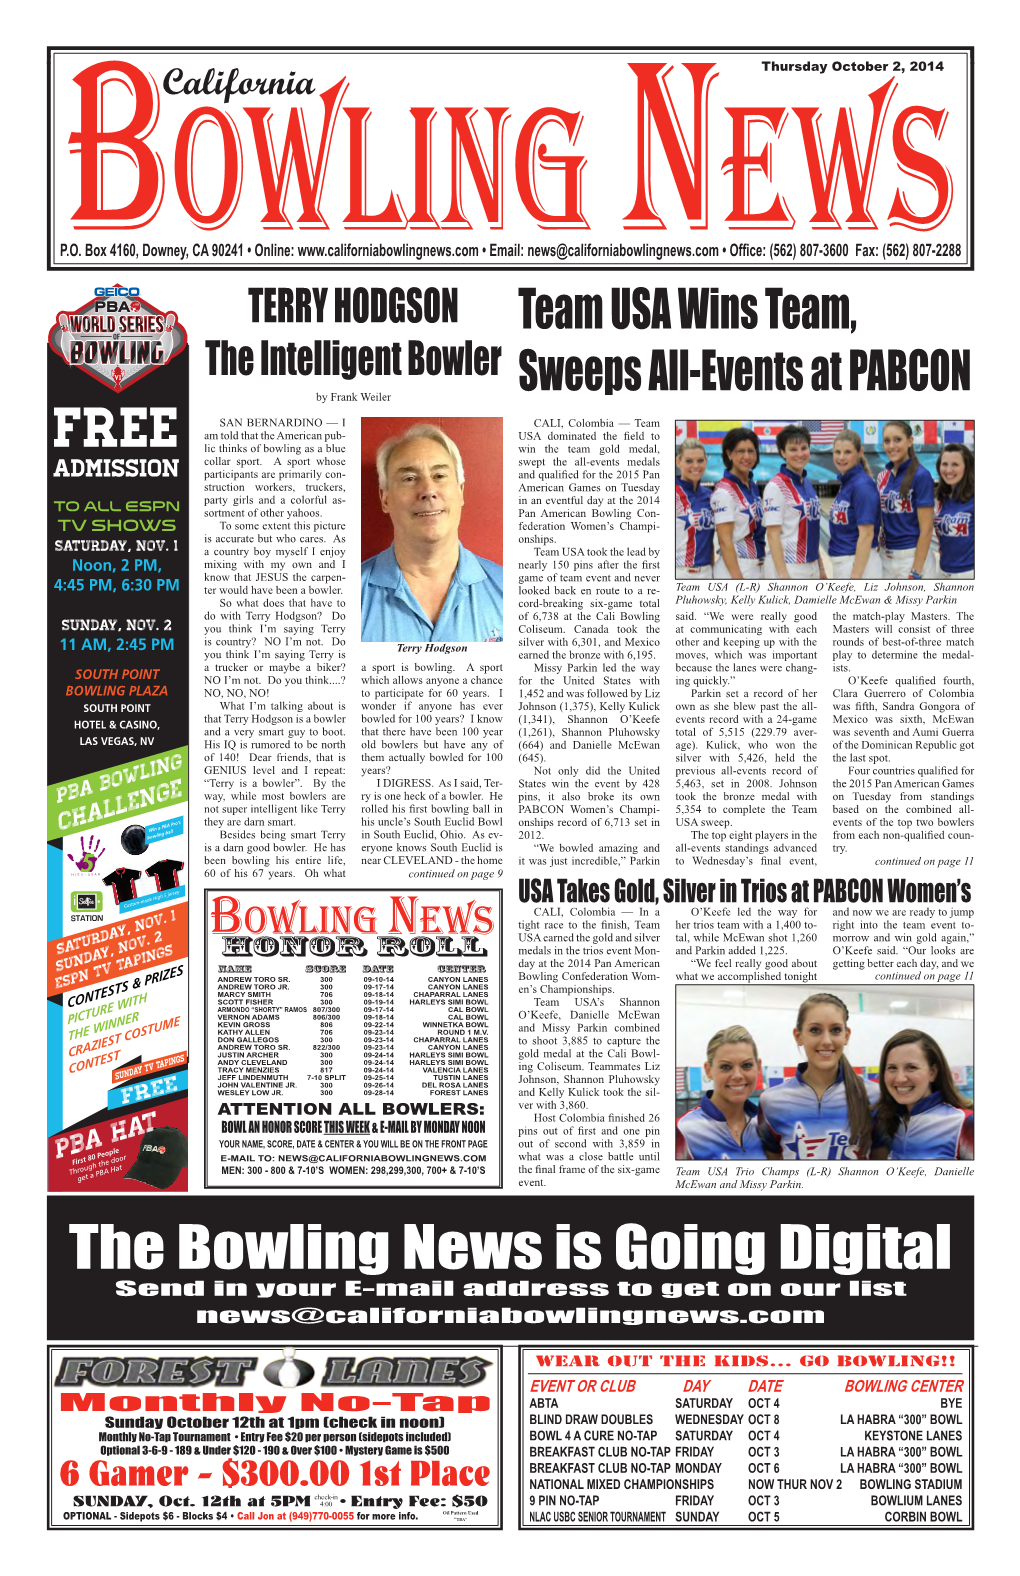 The Bowling News Is Going Digital FREE